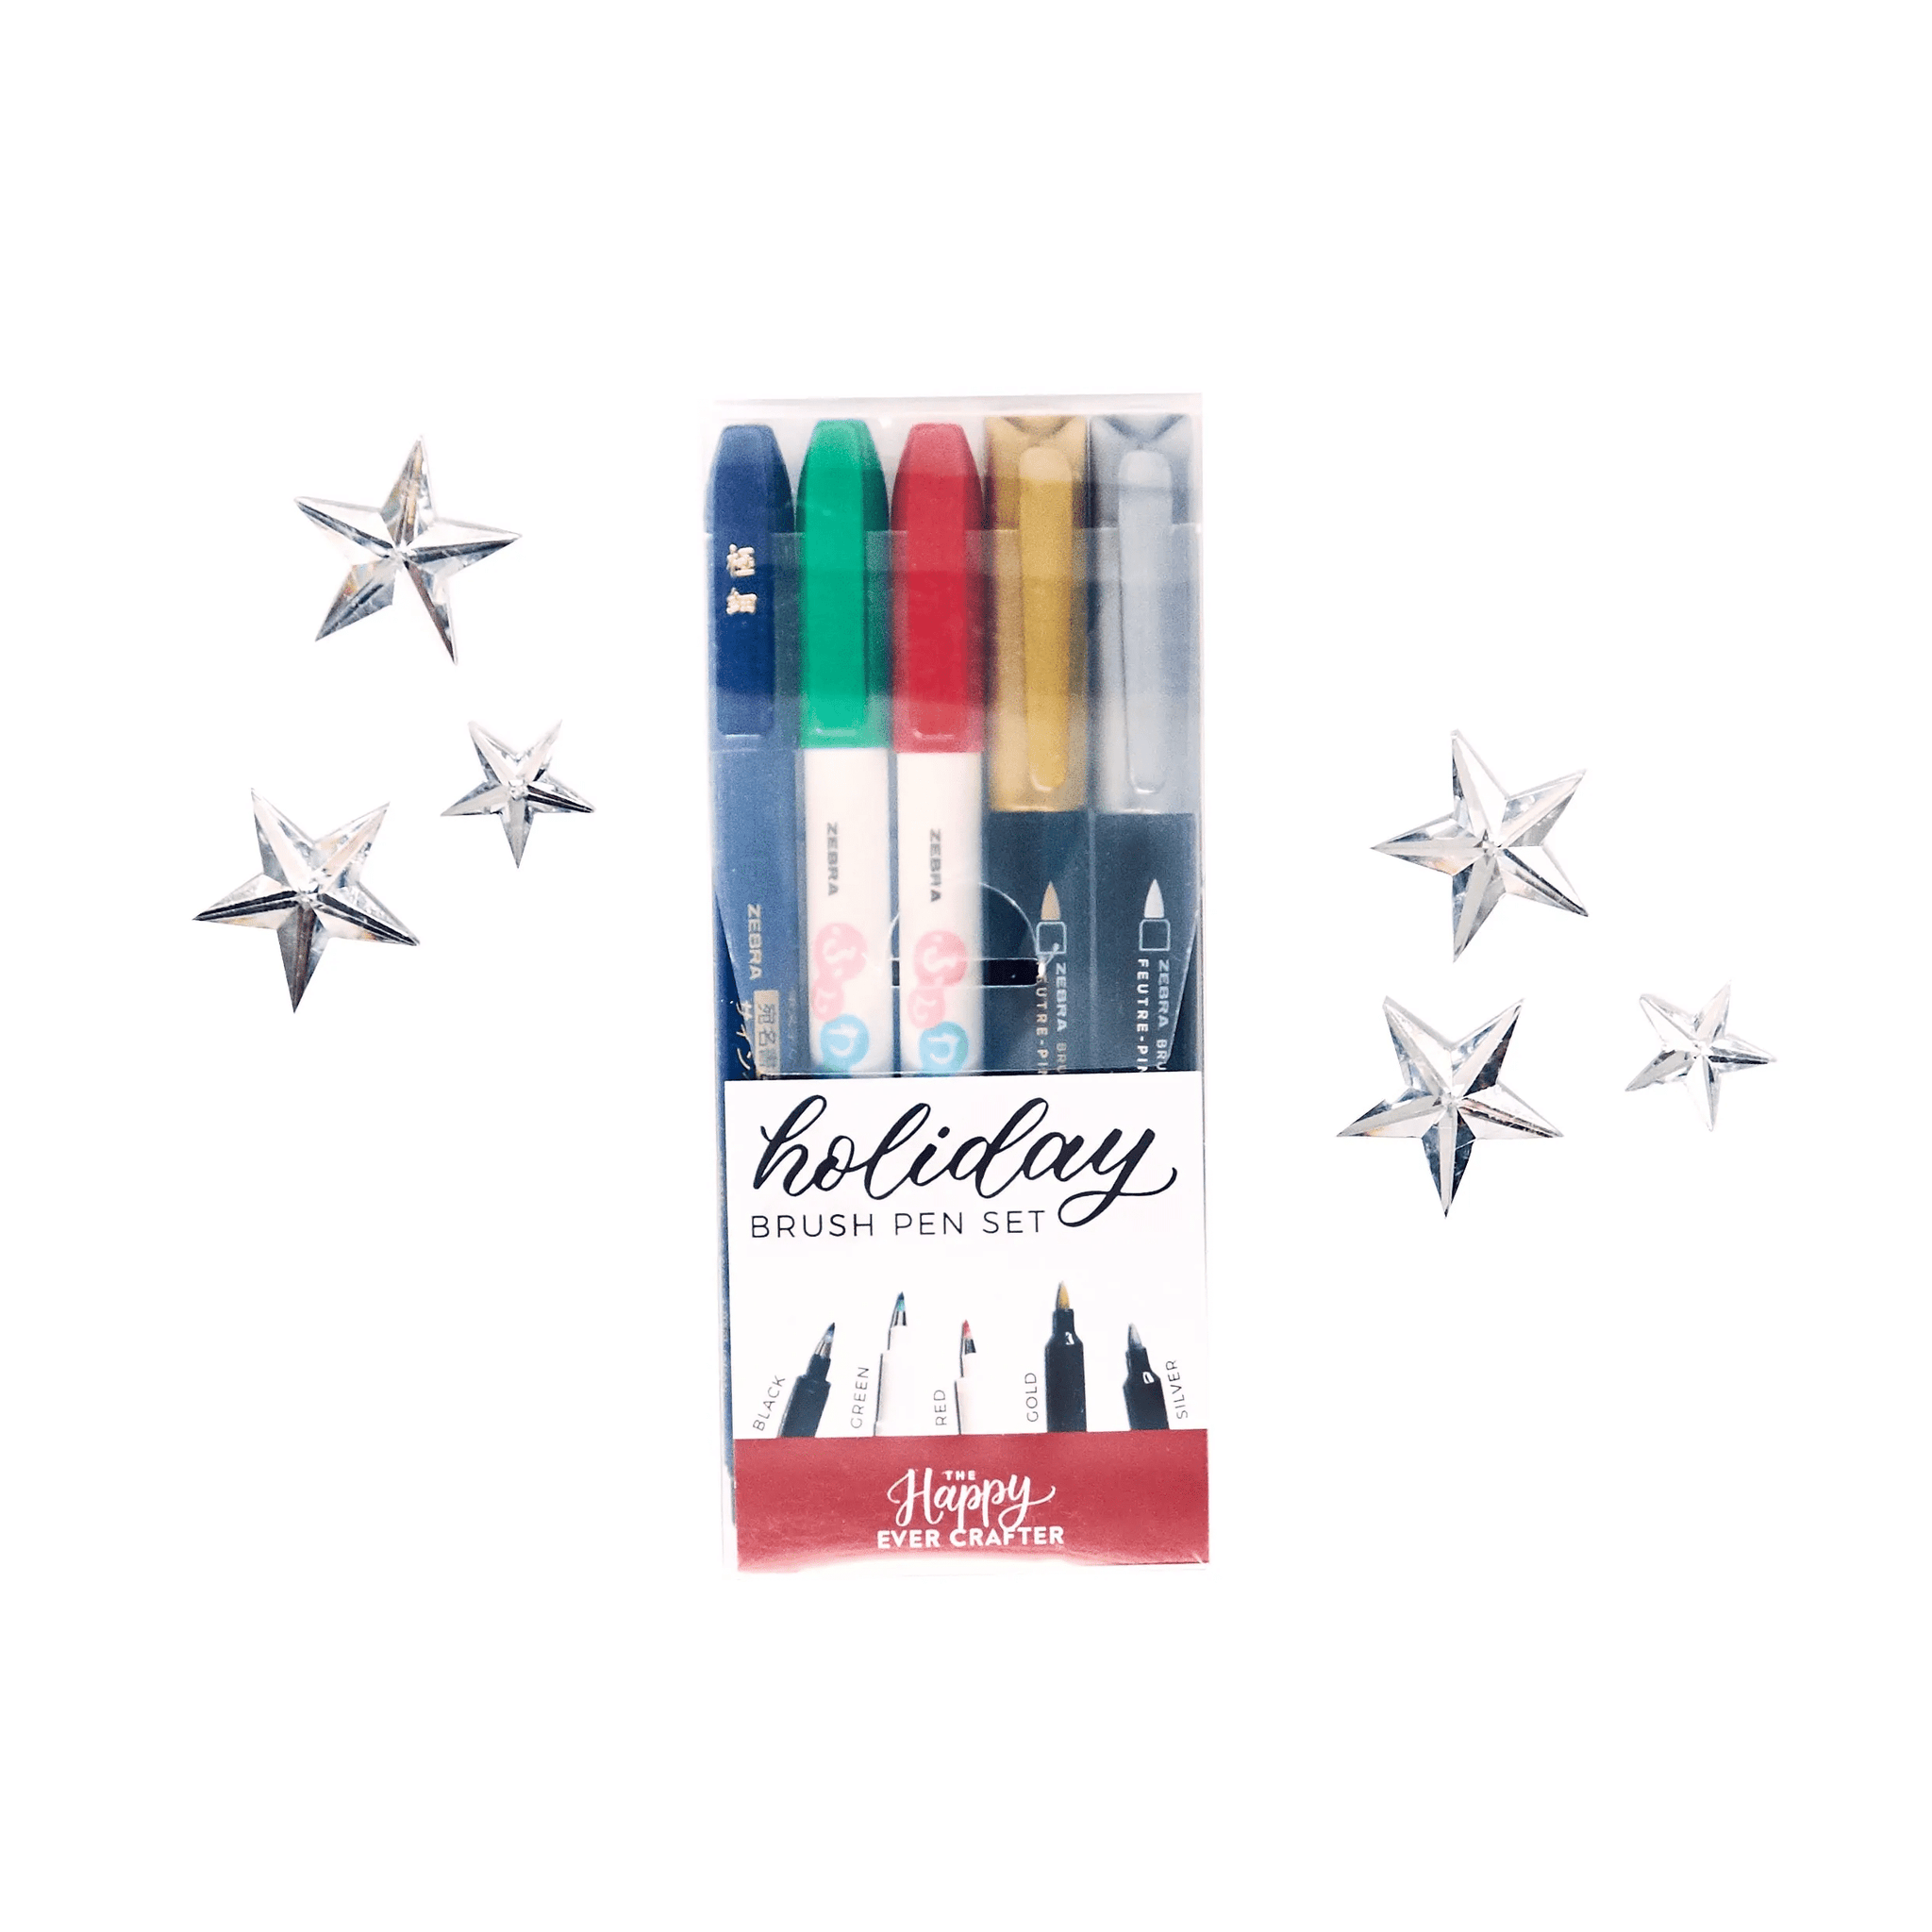 Testing Artistro Paint Pens - The Happy Ever Crafter